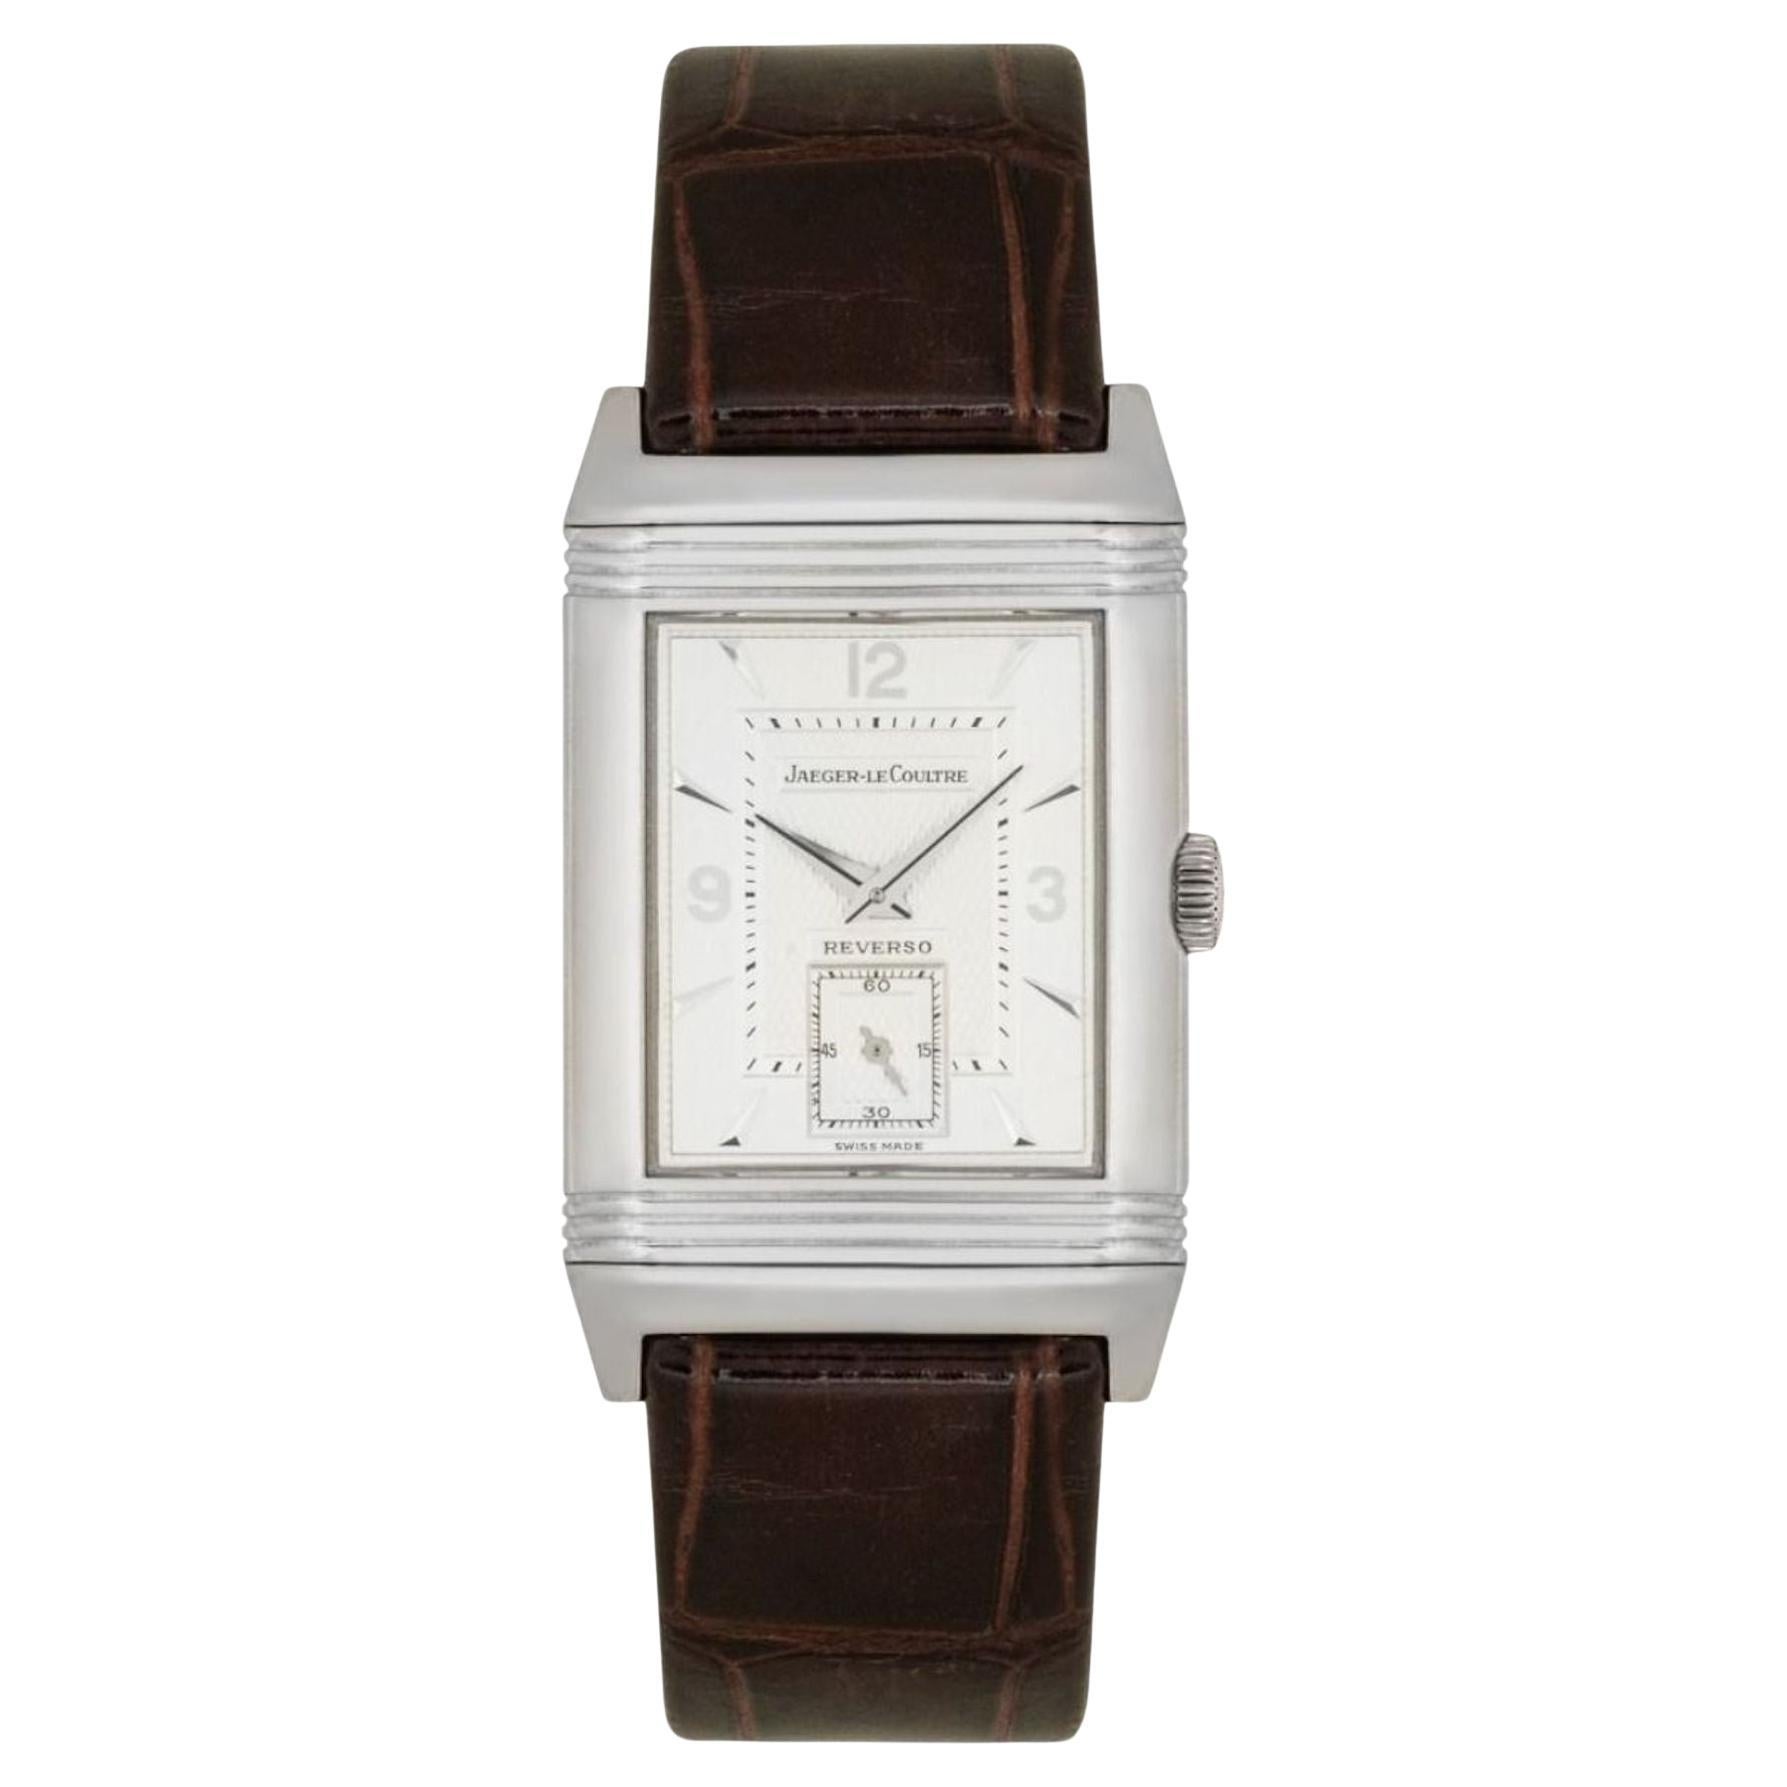 Jaeger LeCoultre Reverso Juventus FC Limited Edition 275.3.62